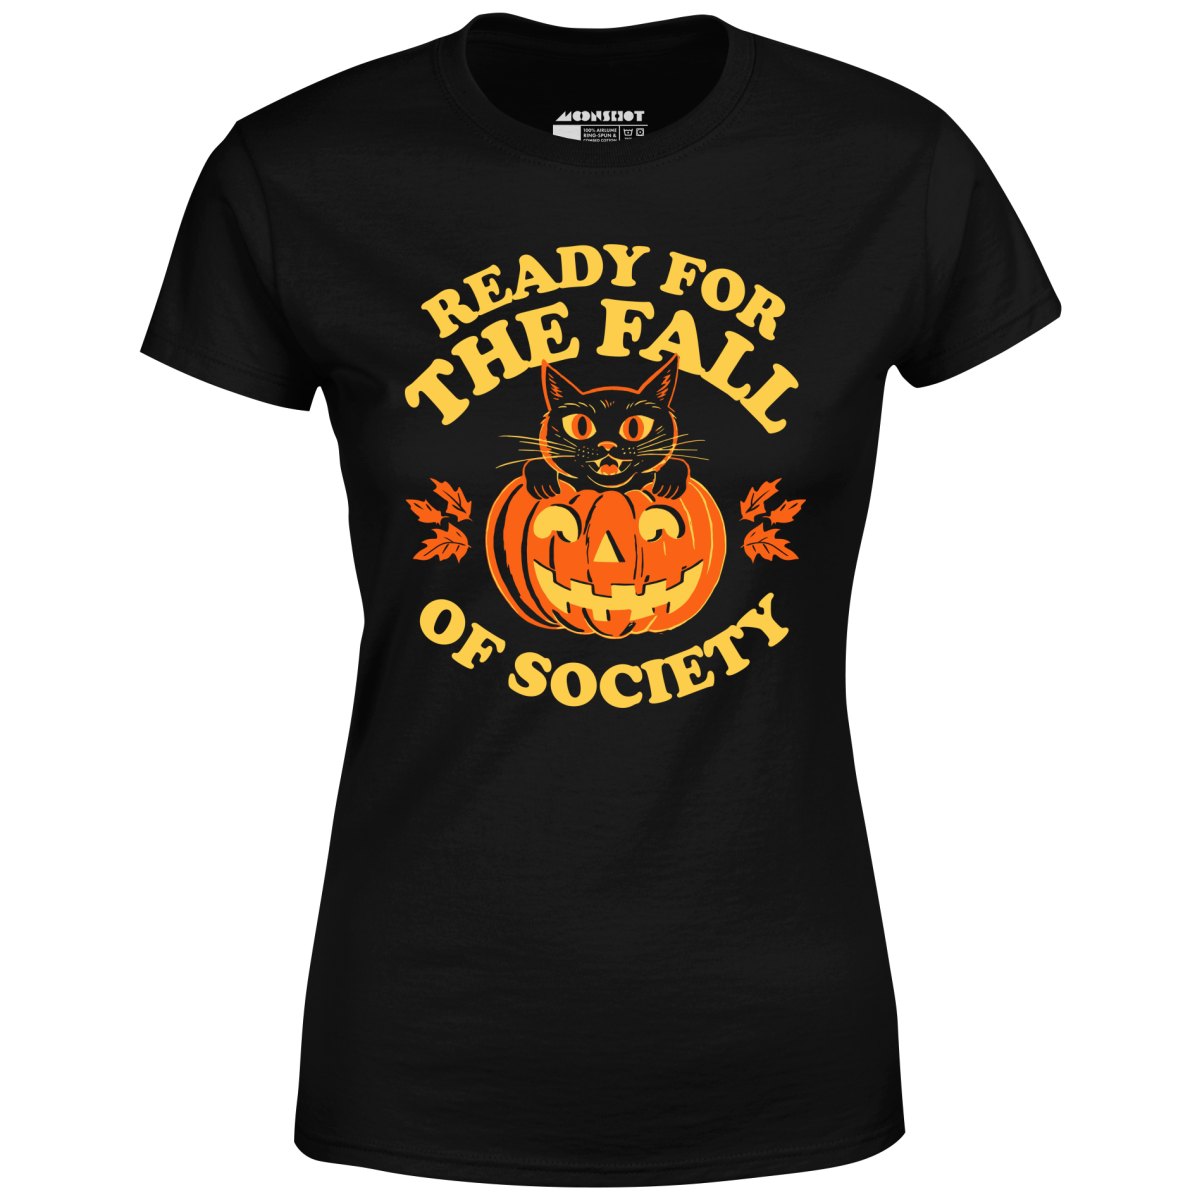 Ready For The Fall of Society - Women's T-Shirt